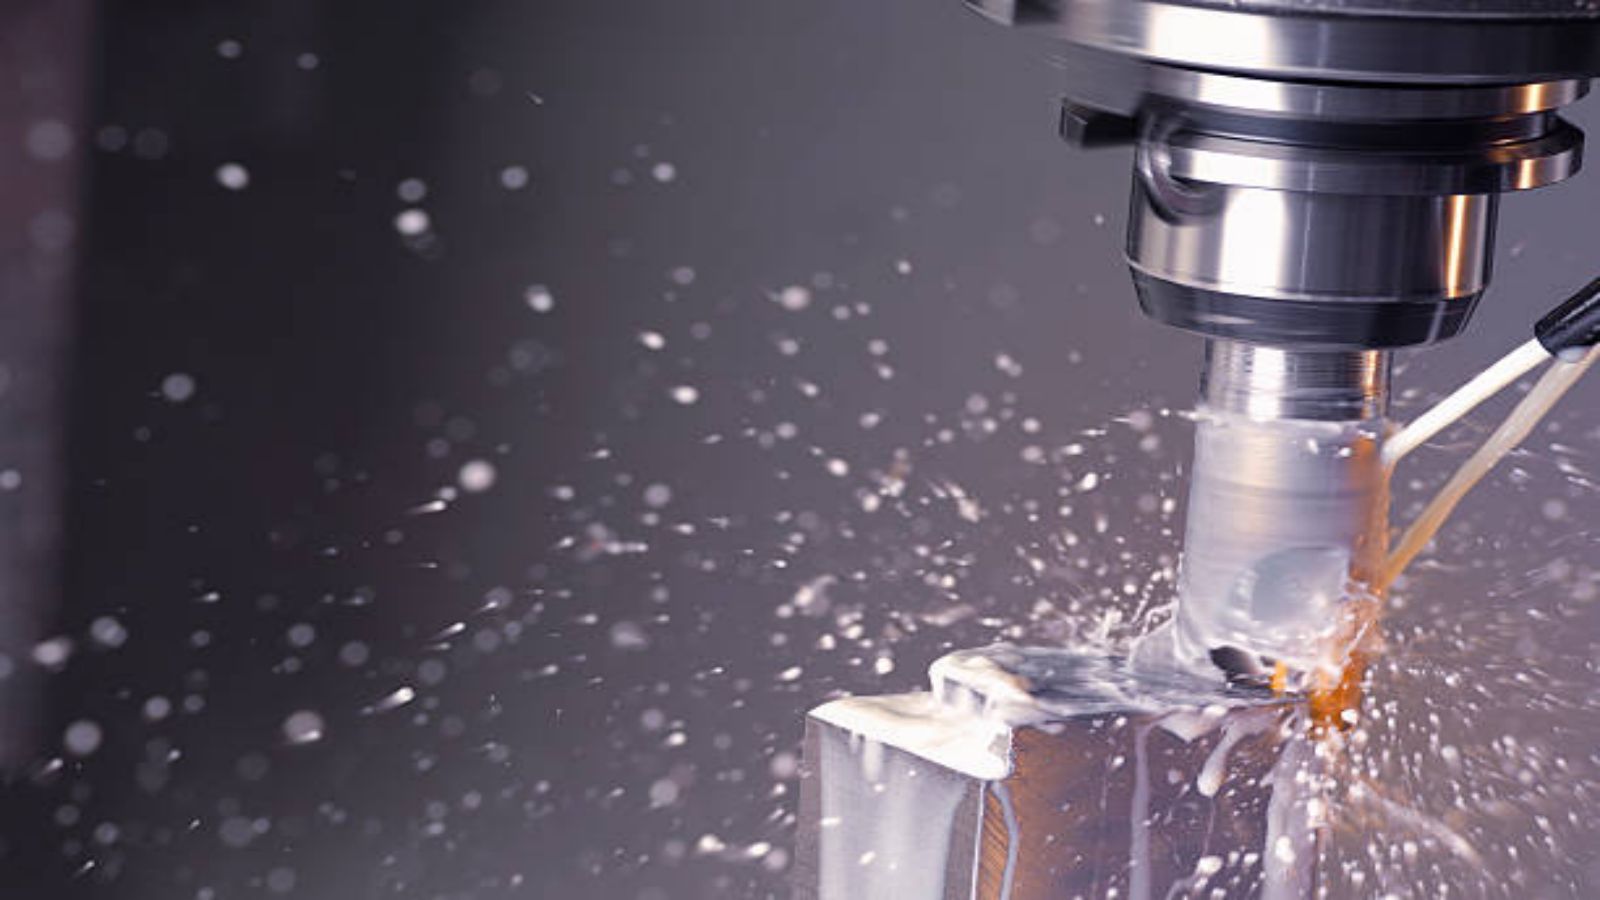 What Can a CNC Machine Make? Exploring the Versatility of CNC Technology